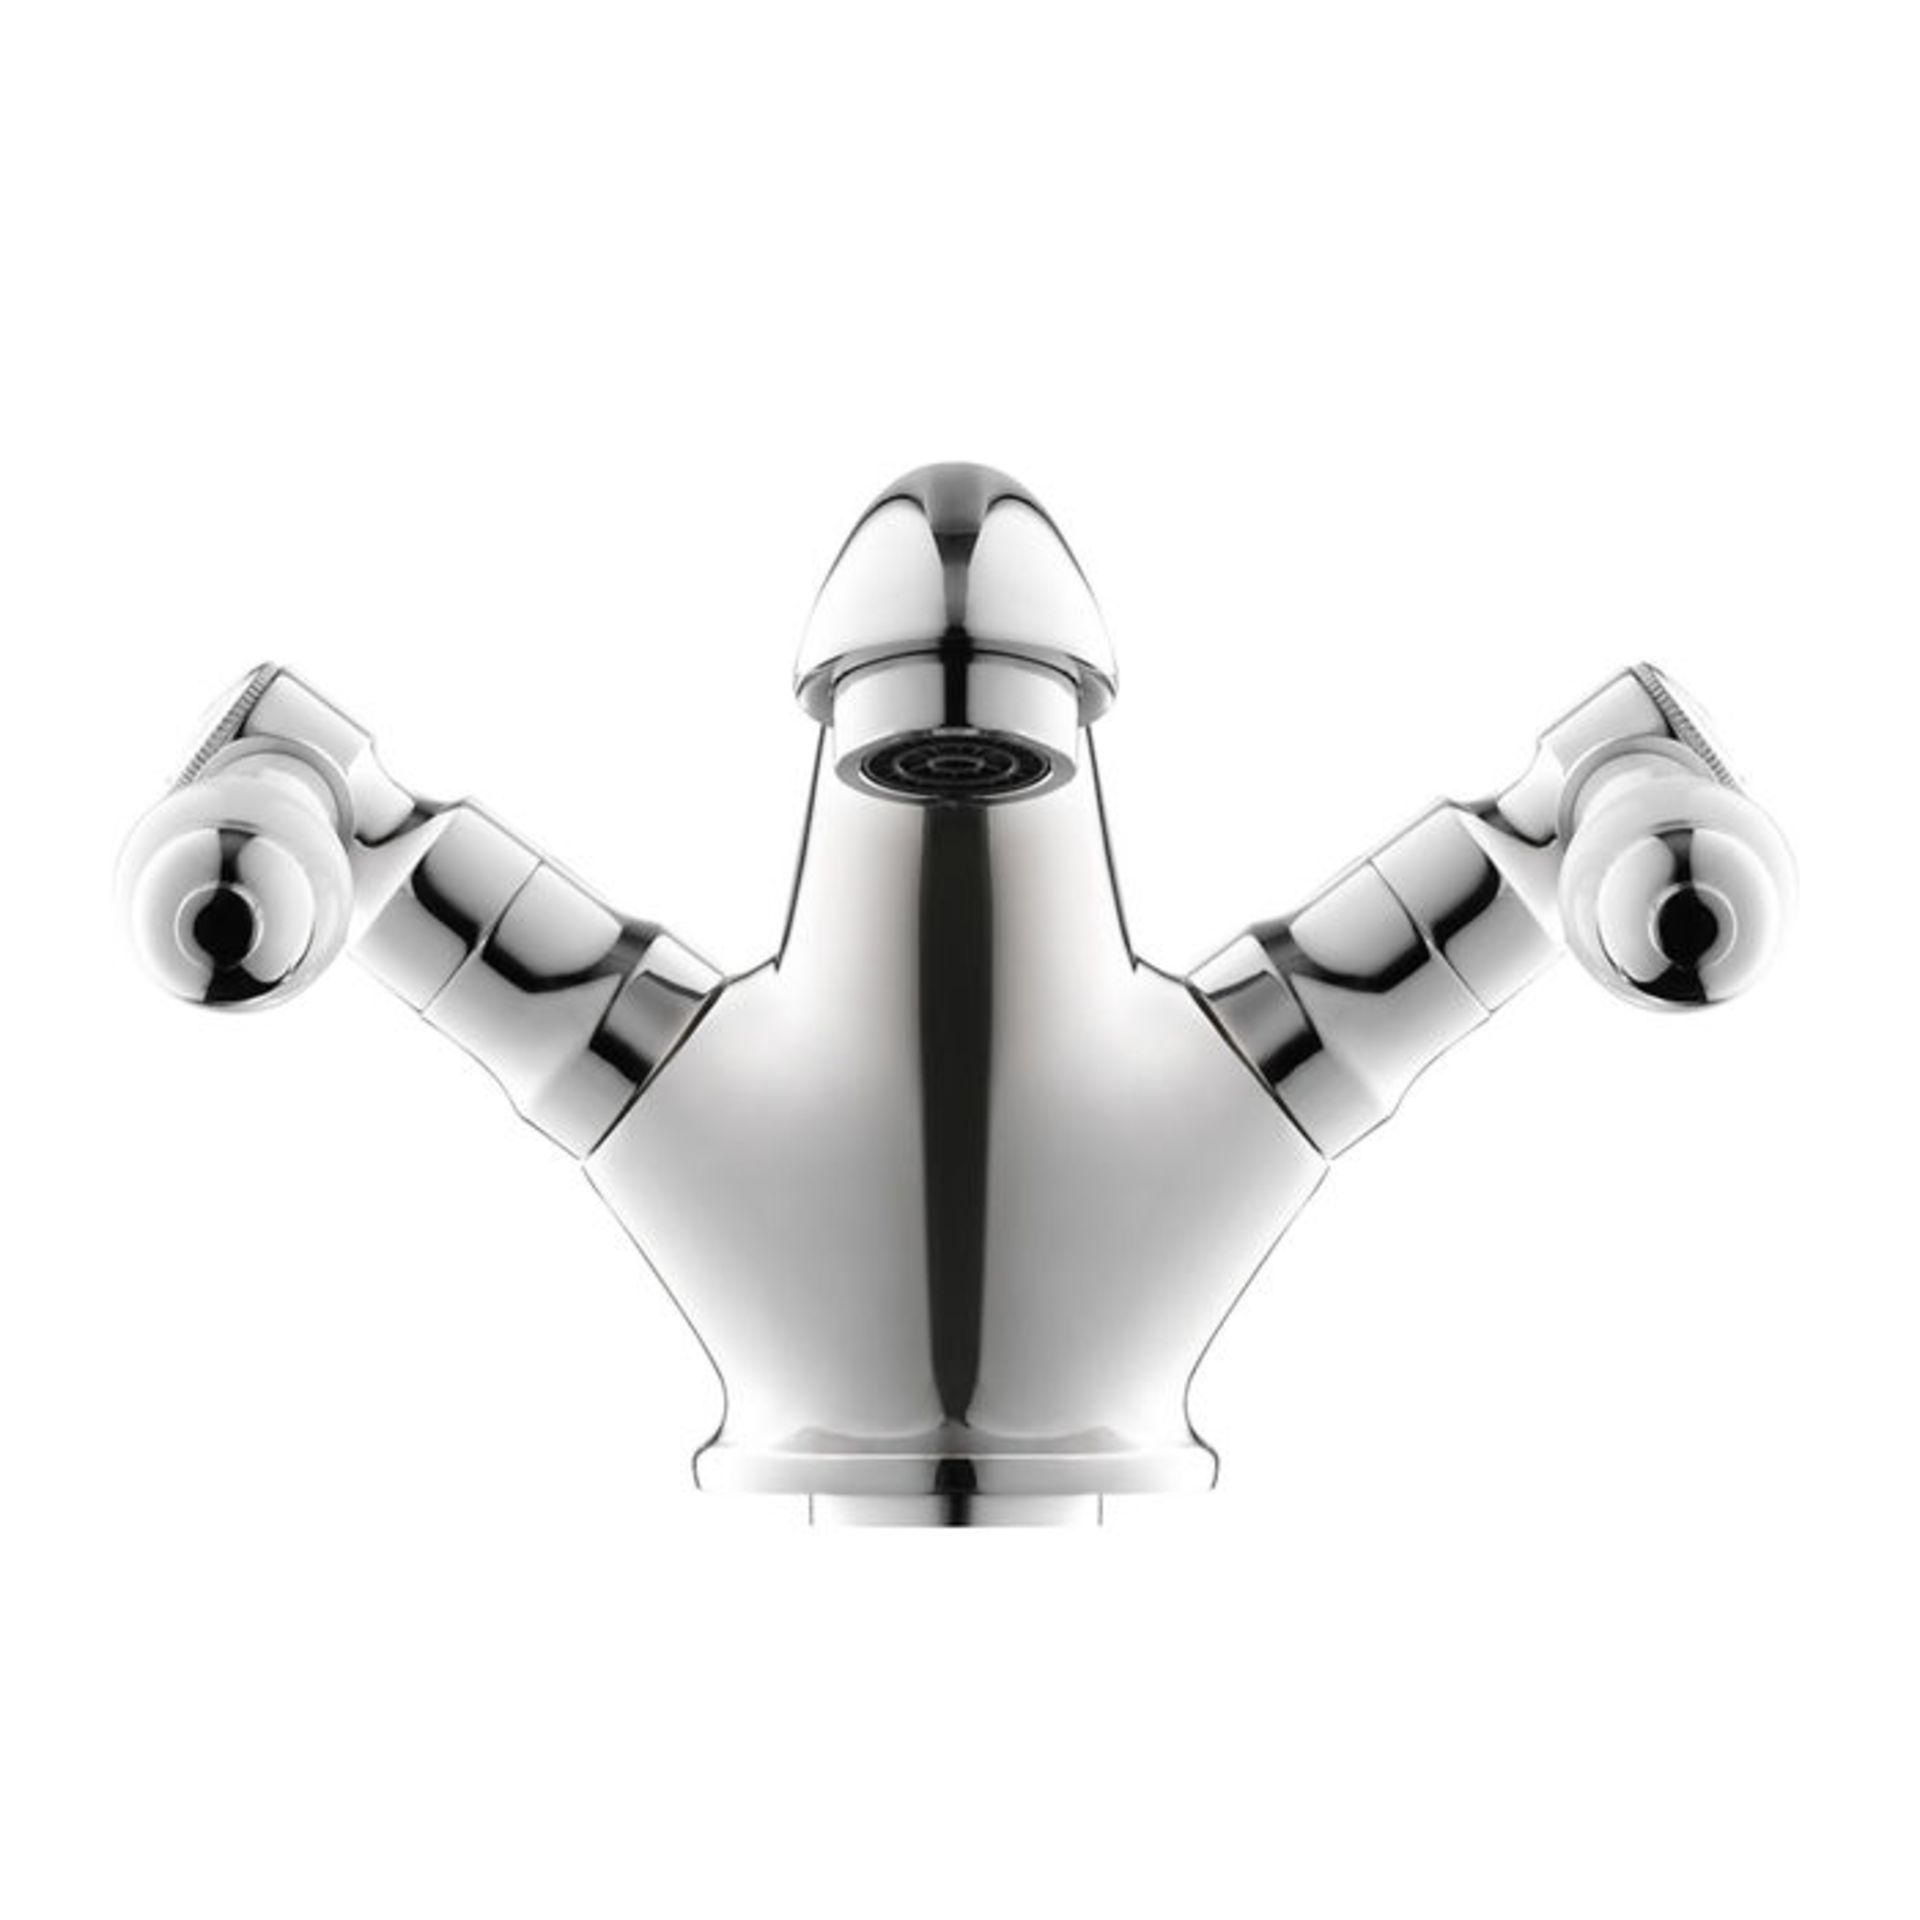 (SP91) Regal Chrome Traditional Basin Sink Lever Mixer Tap Chrome Plated Solid Brass Mixer cartridge - Image 6 of 6